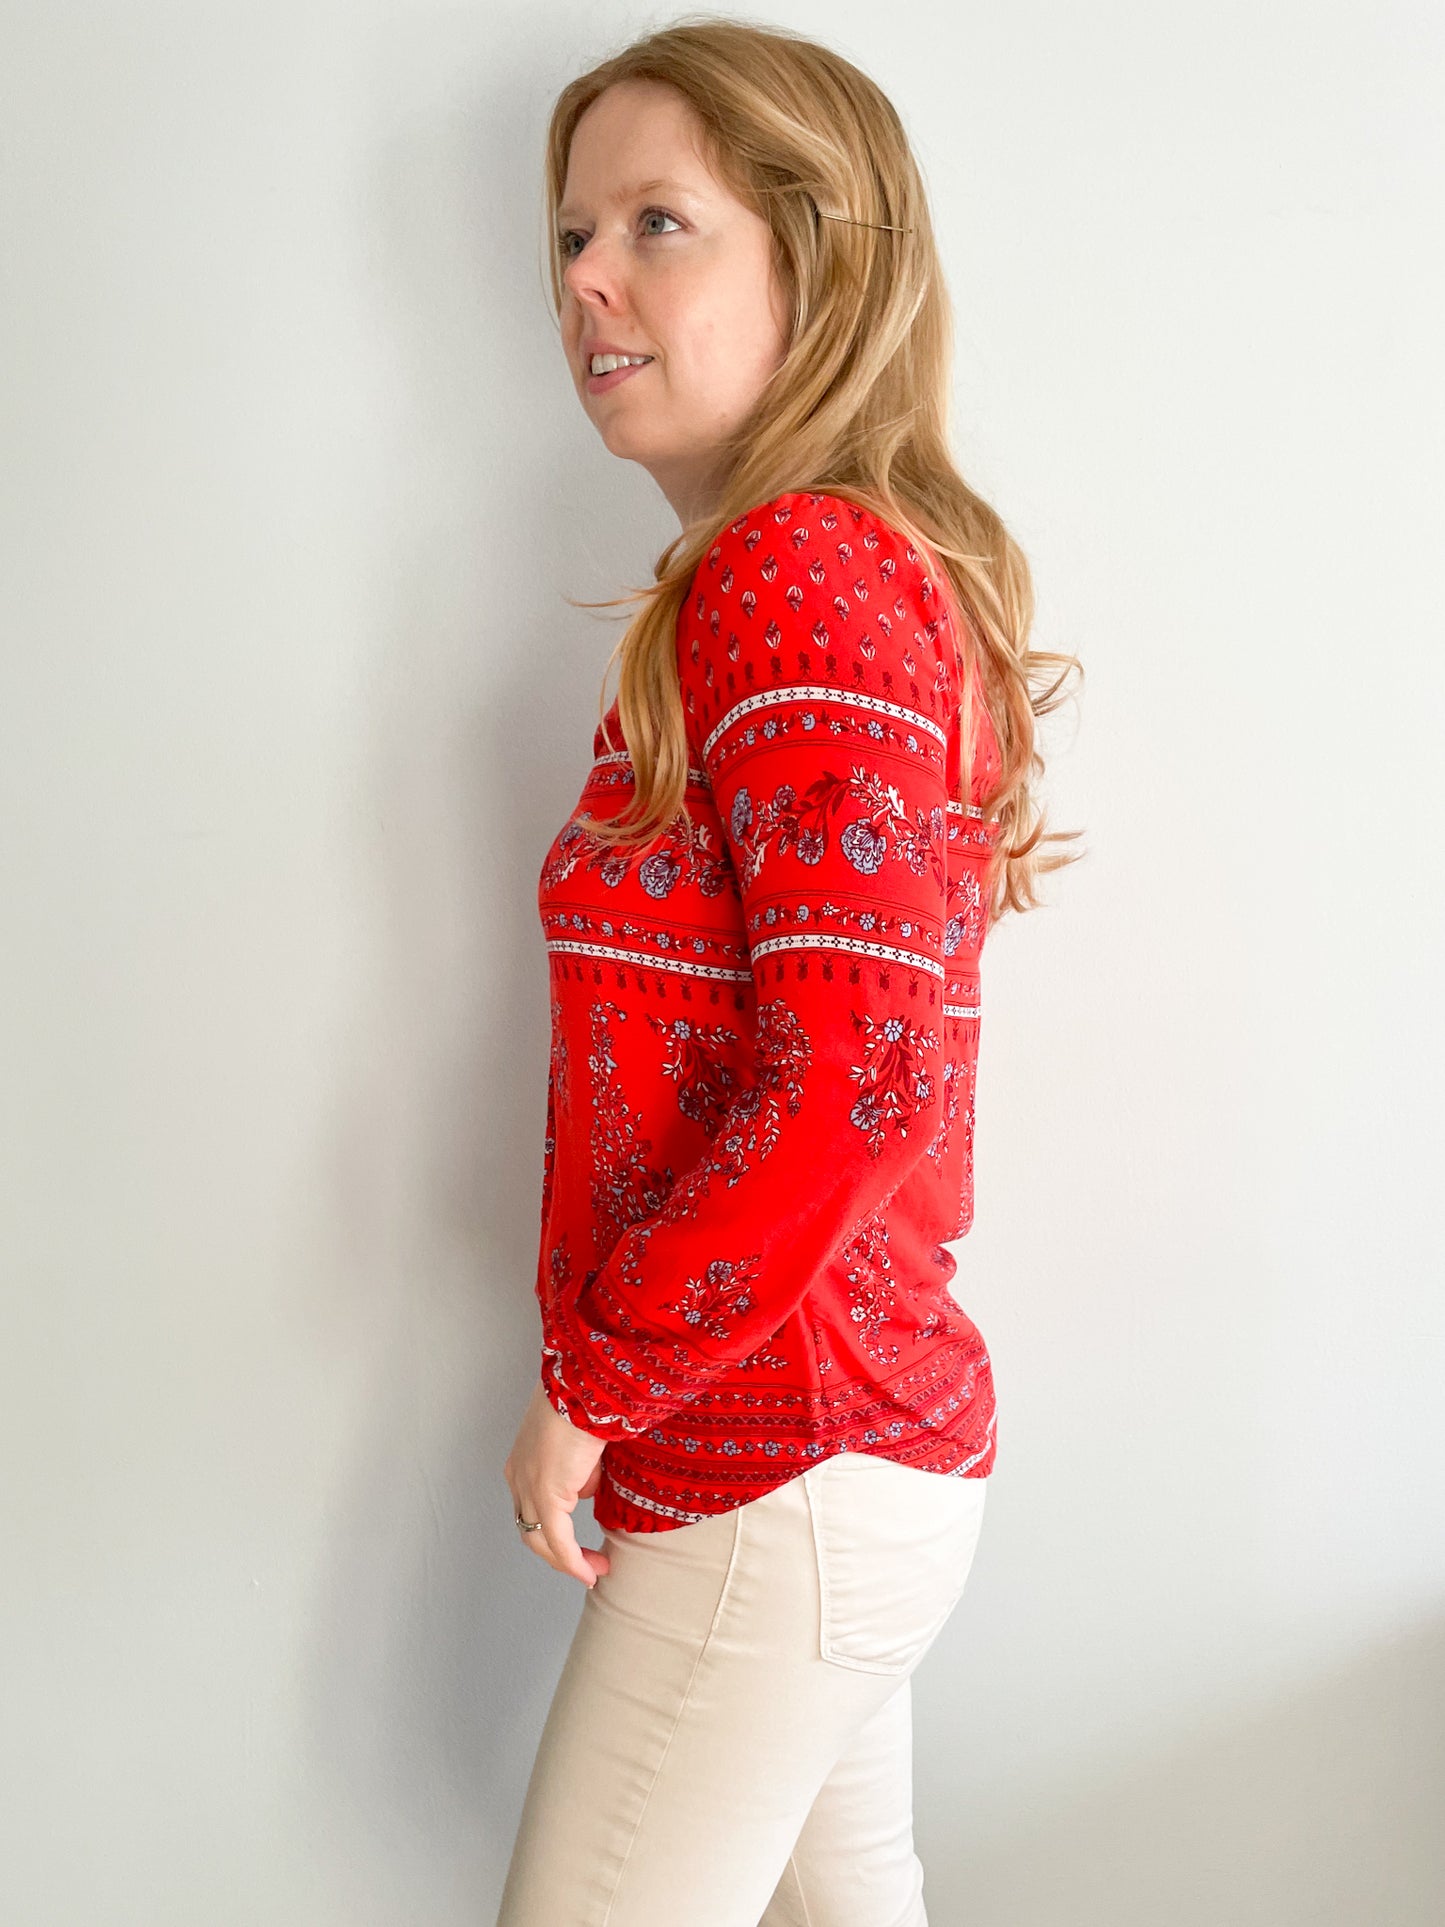 Red Floral V-Neck Blouse Top - Small